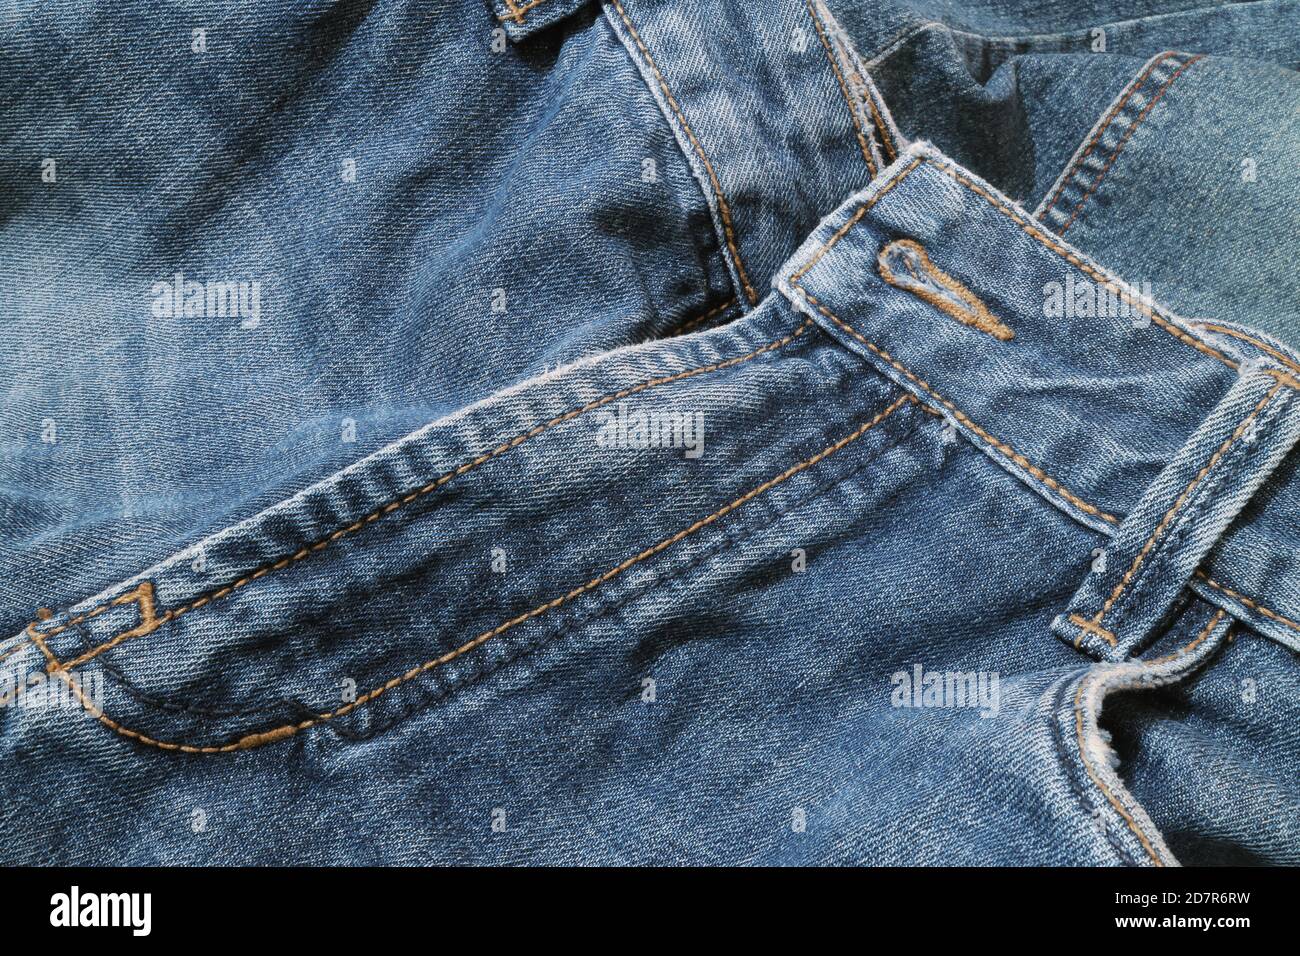 Textured background of blue denim jeans with seam and thread stitch ...